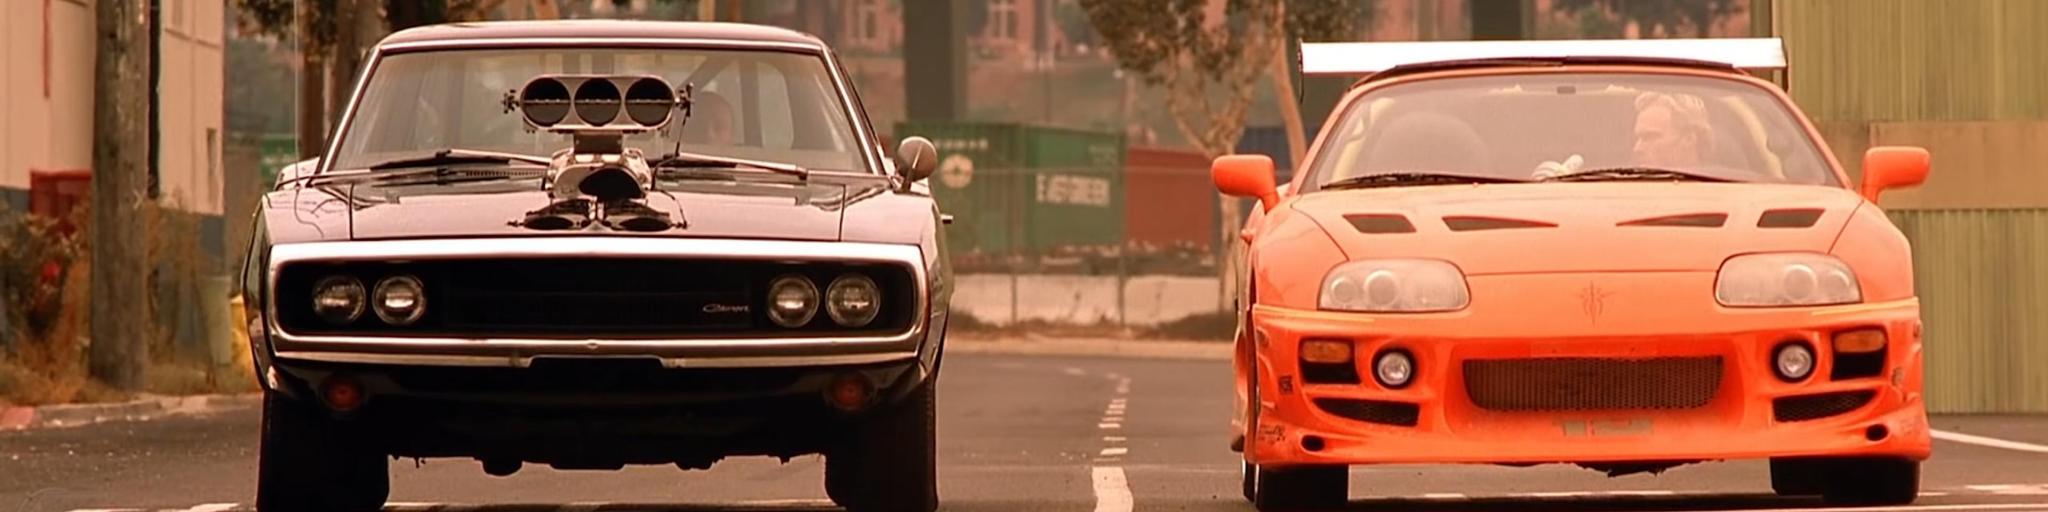 Two cars, one black and one orange, with the main characters of the Fast and Furious movie, Dom and Brian, about to start a race.